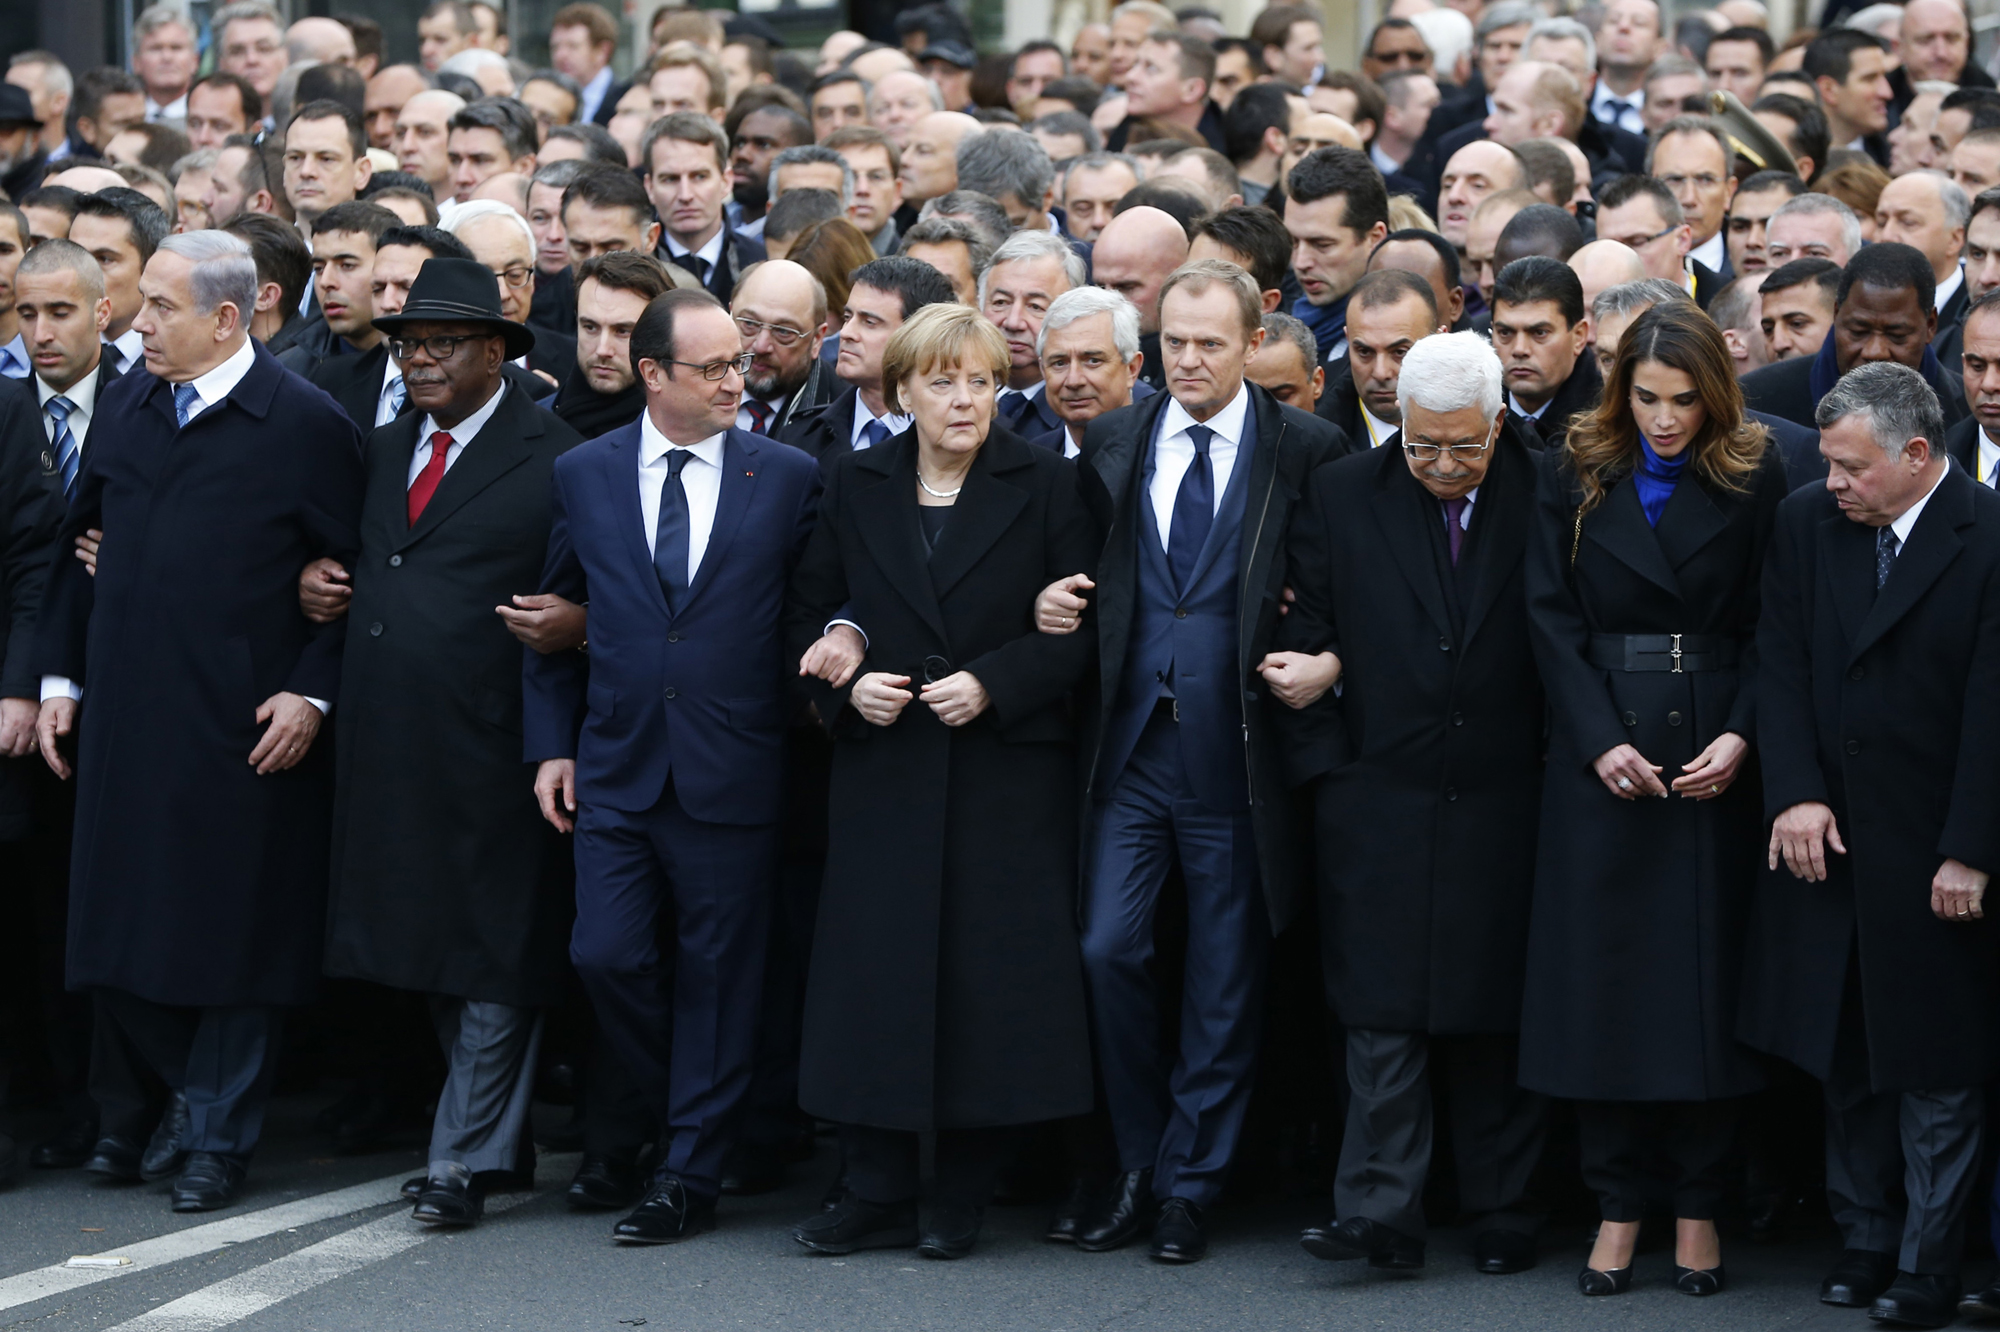 French President Hollande is surrounded by head of states as they attend the solidarity march in the streets of Paris